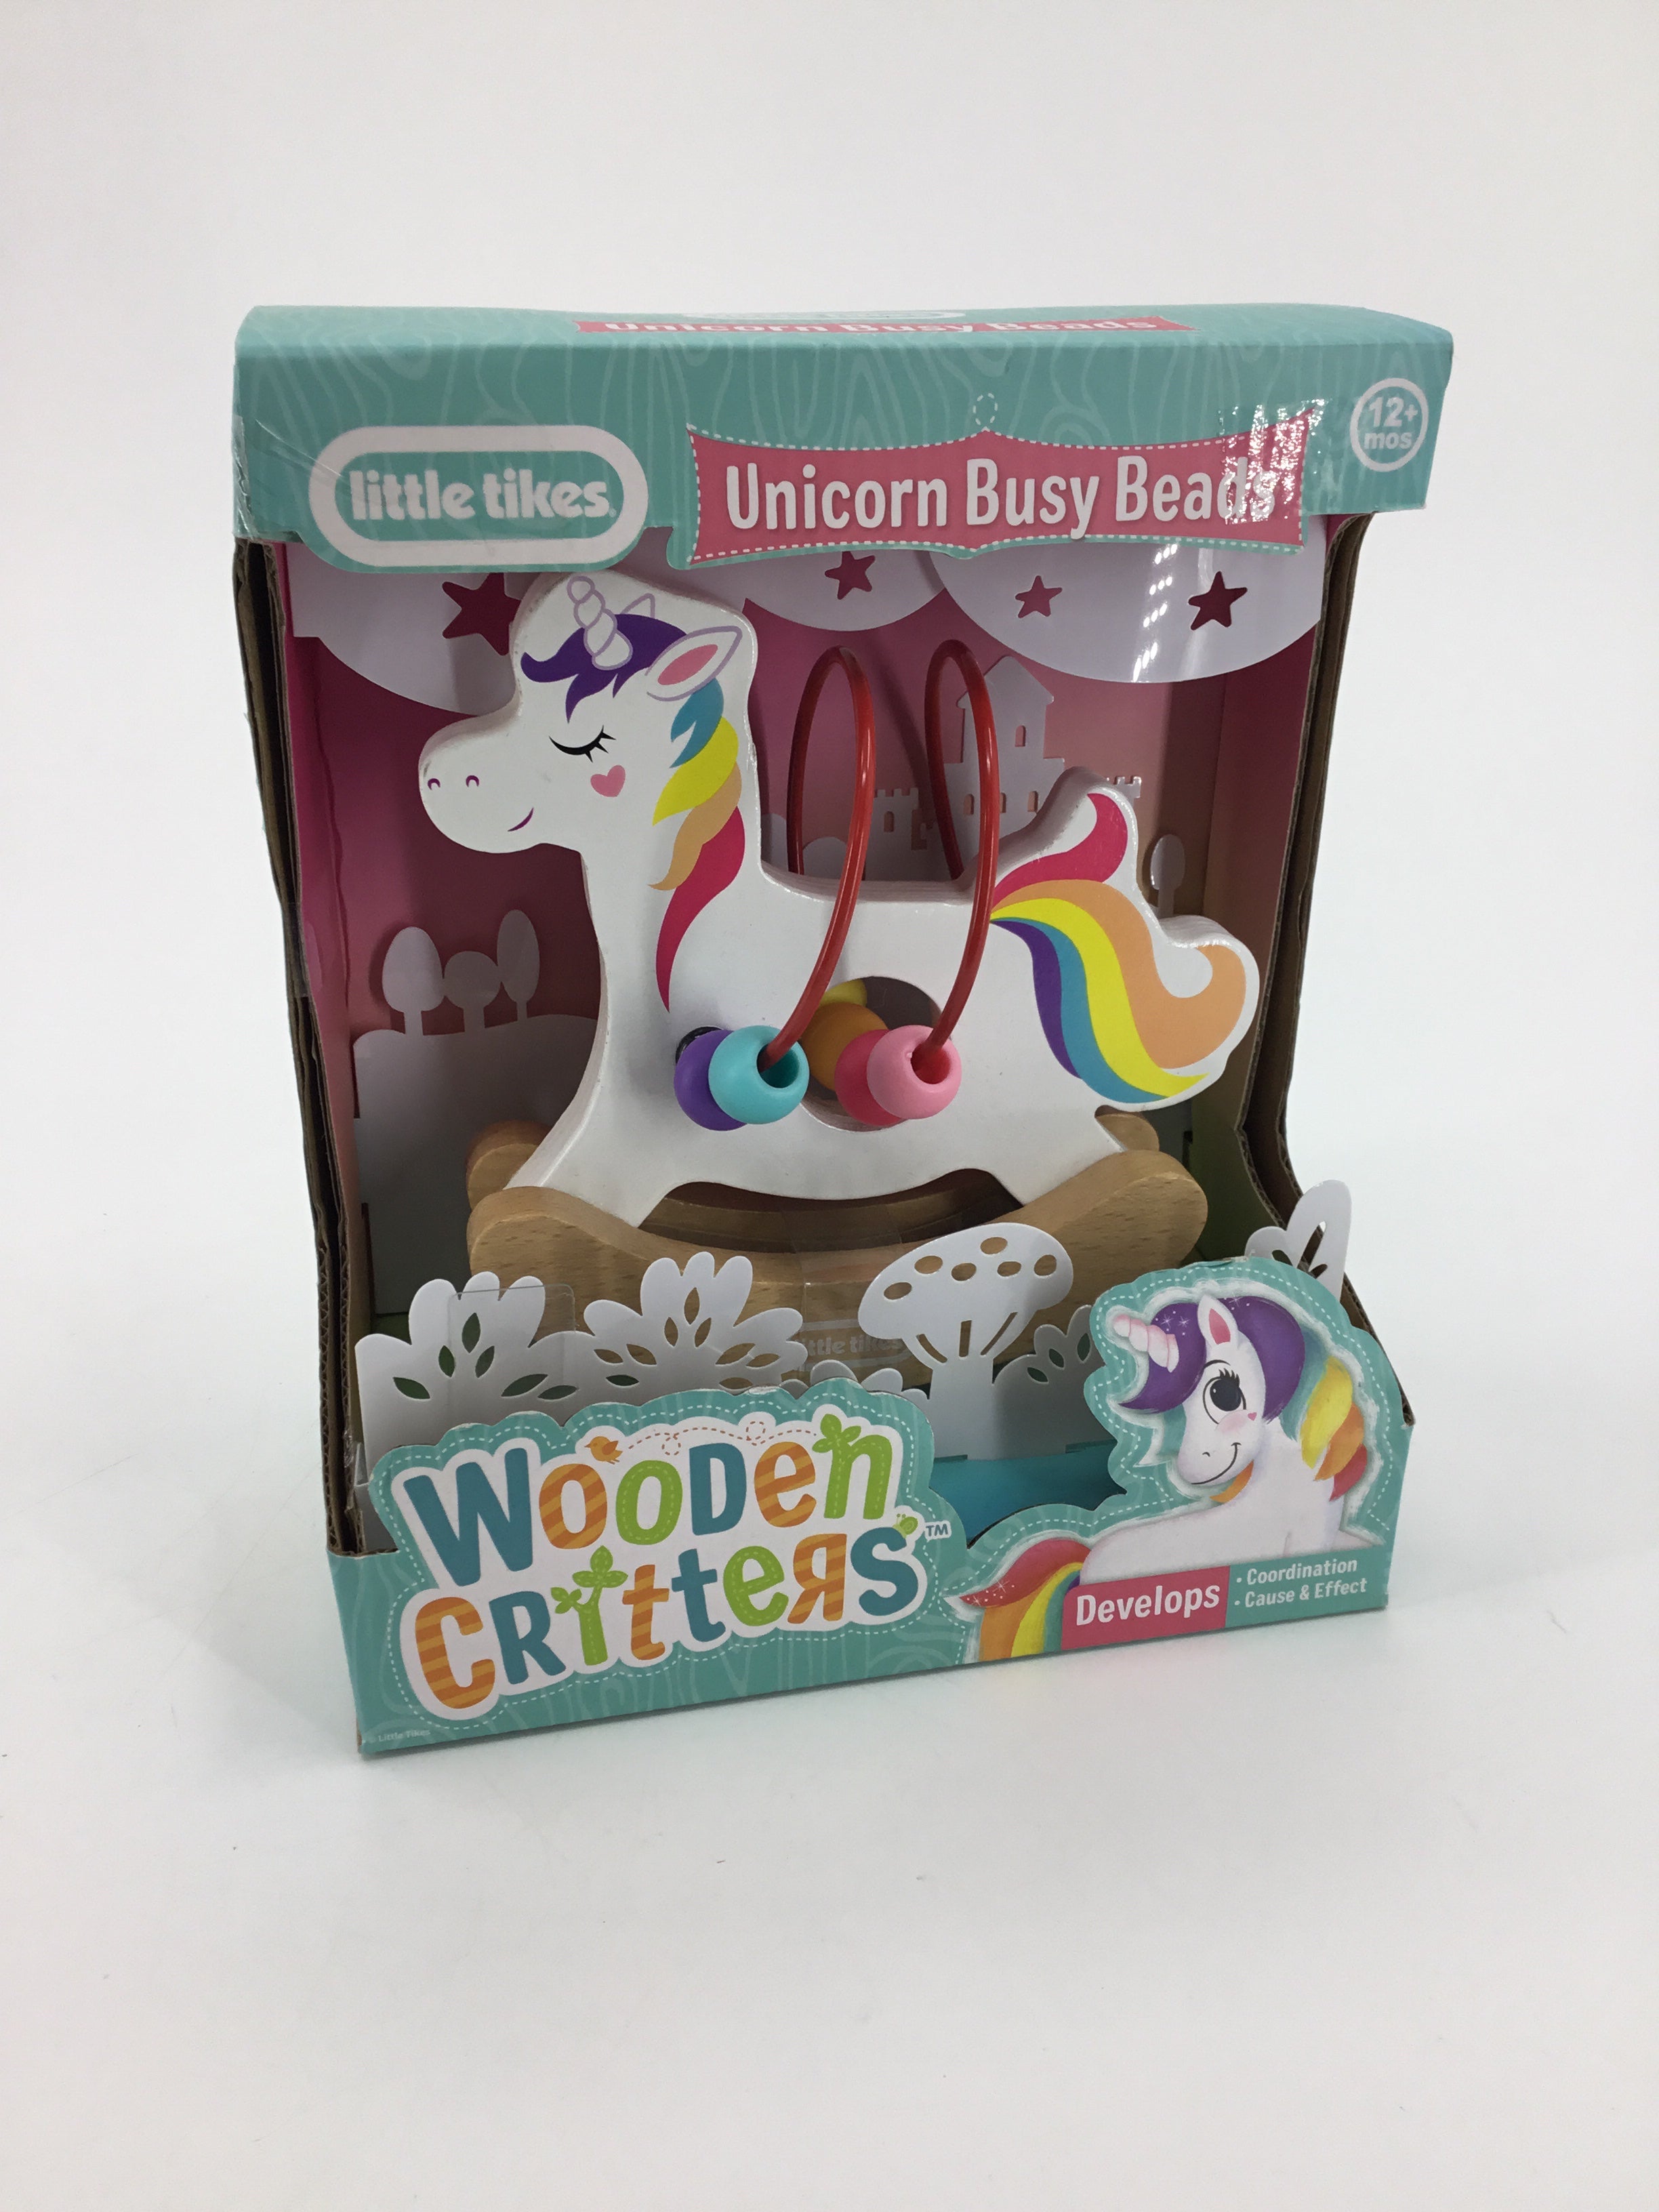 Little Tikes Wooden Critters Unicorn Busy Beads